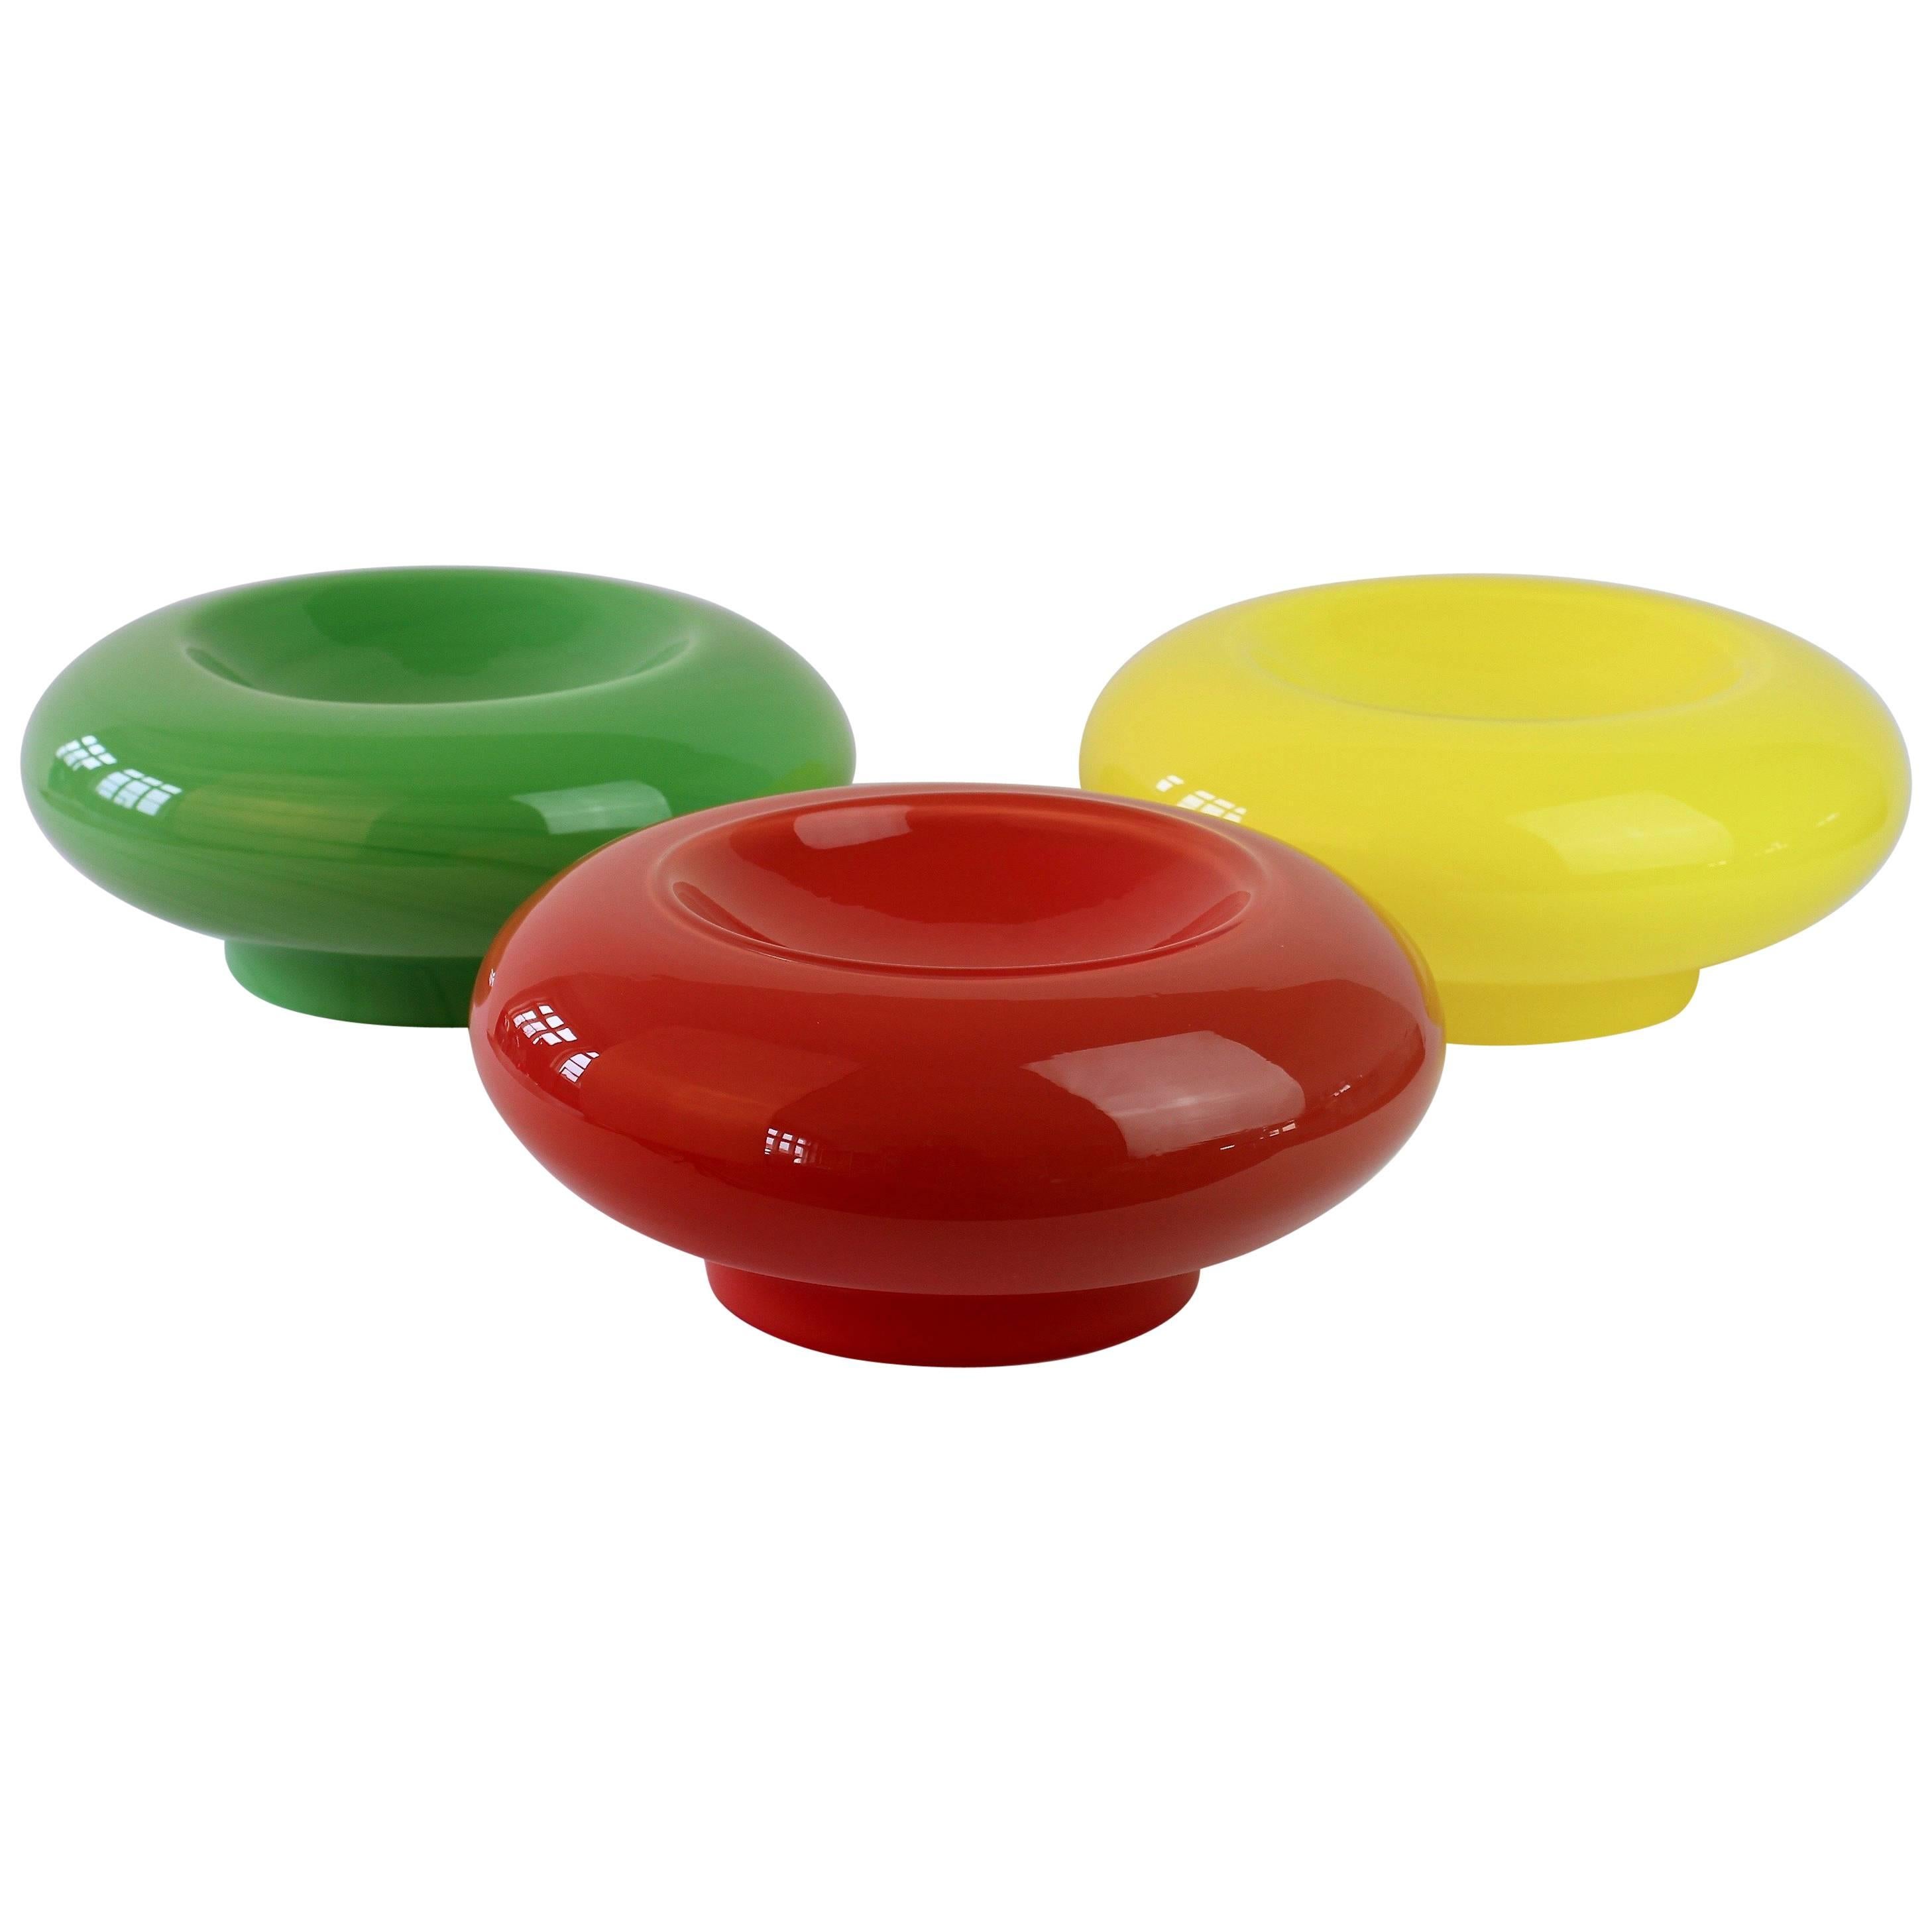 Trio of Green, Red and Yellow Italian Murano Glass Bowls or Vases